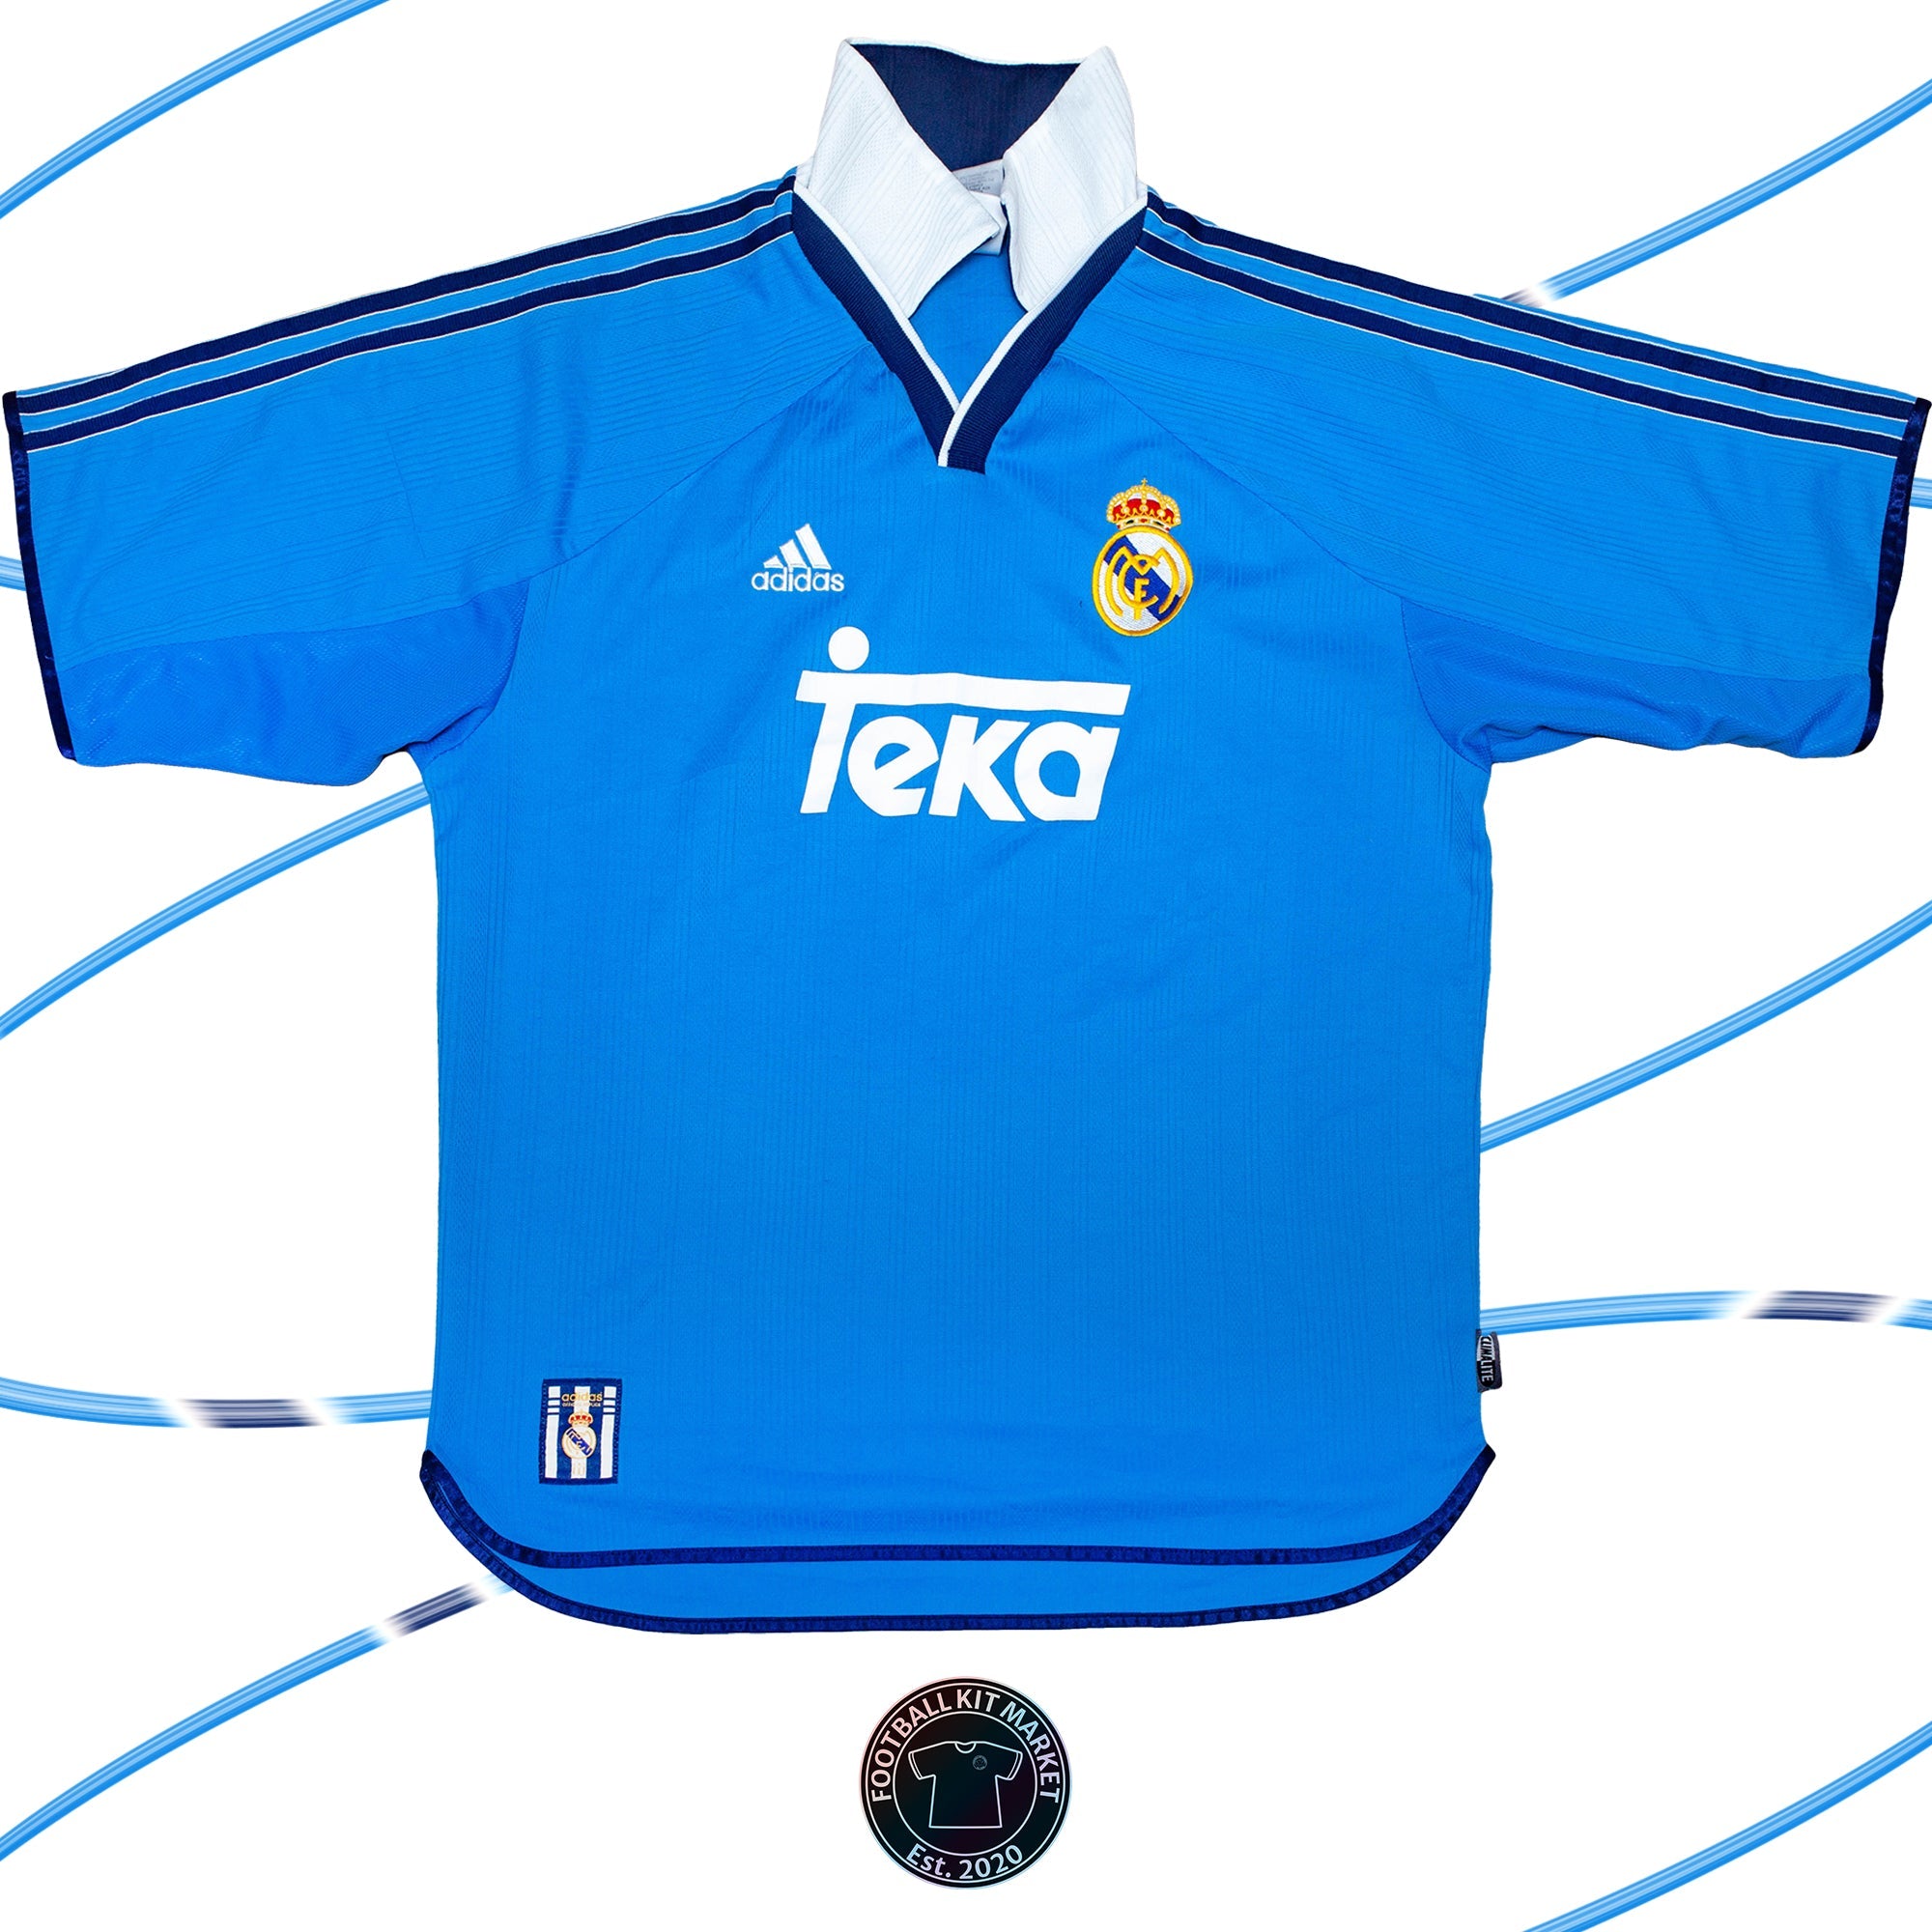 Genuine REAL MADRID 3rd (1999-2000) - ADIDAS (L) - Product Image from Football Kit Market